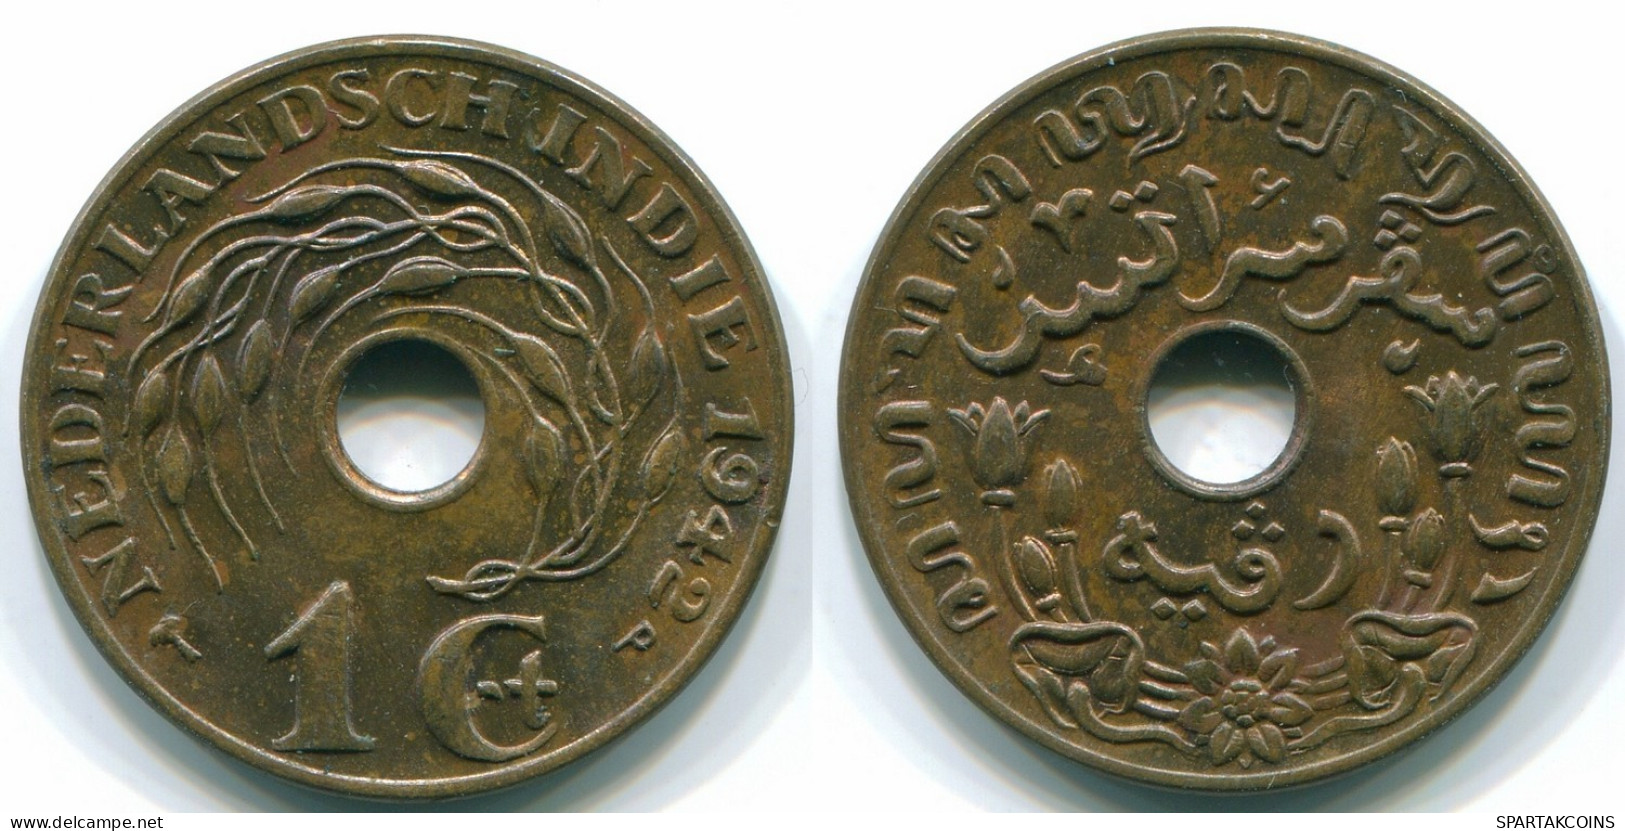 1 CENT 1942 NETHERLANDS EAST INDIES INDONESIA Bronze Colonial Coin #S10314.U.A - Dutch East Indies